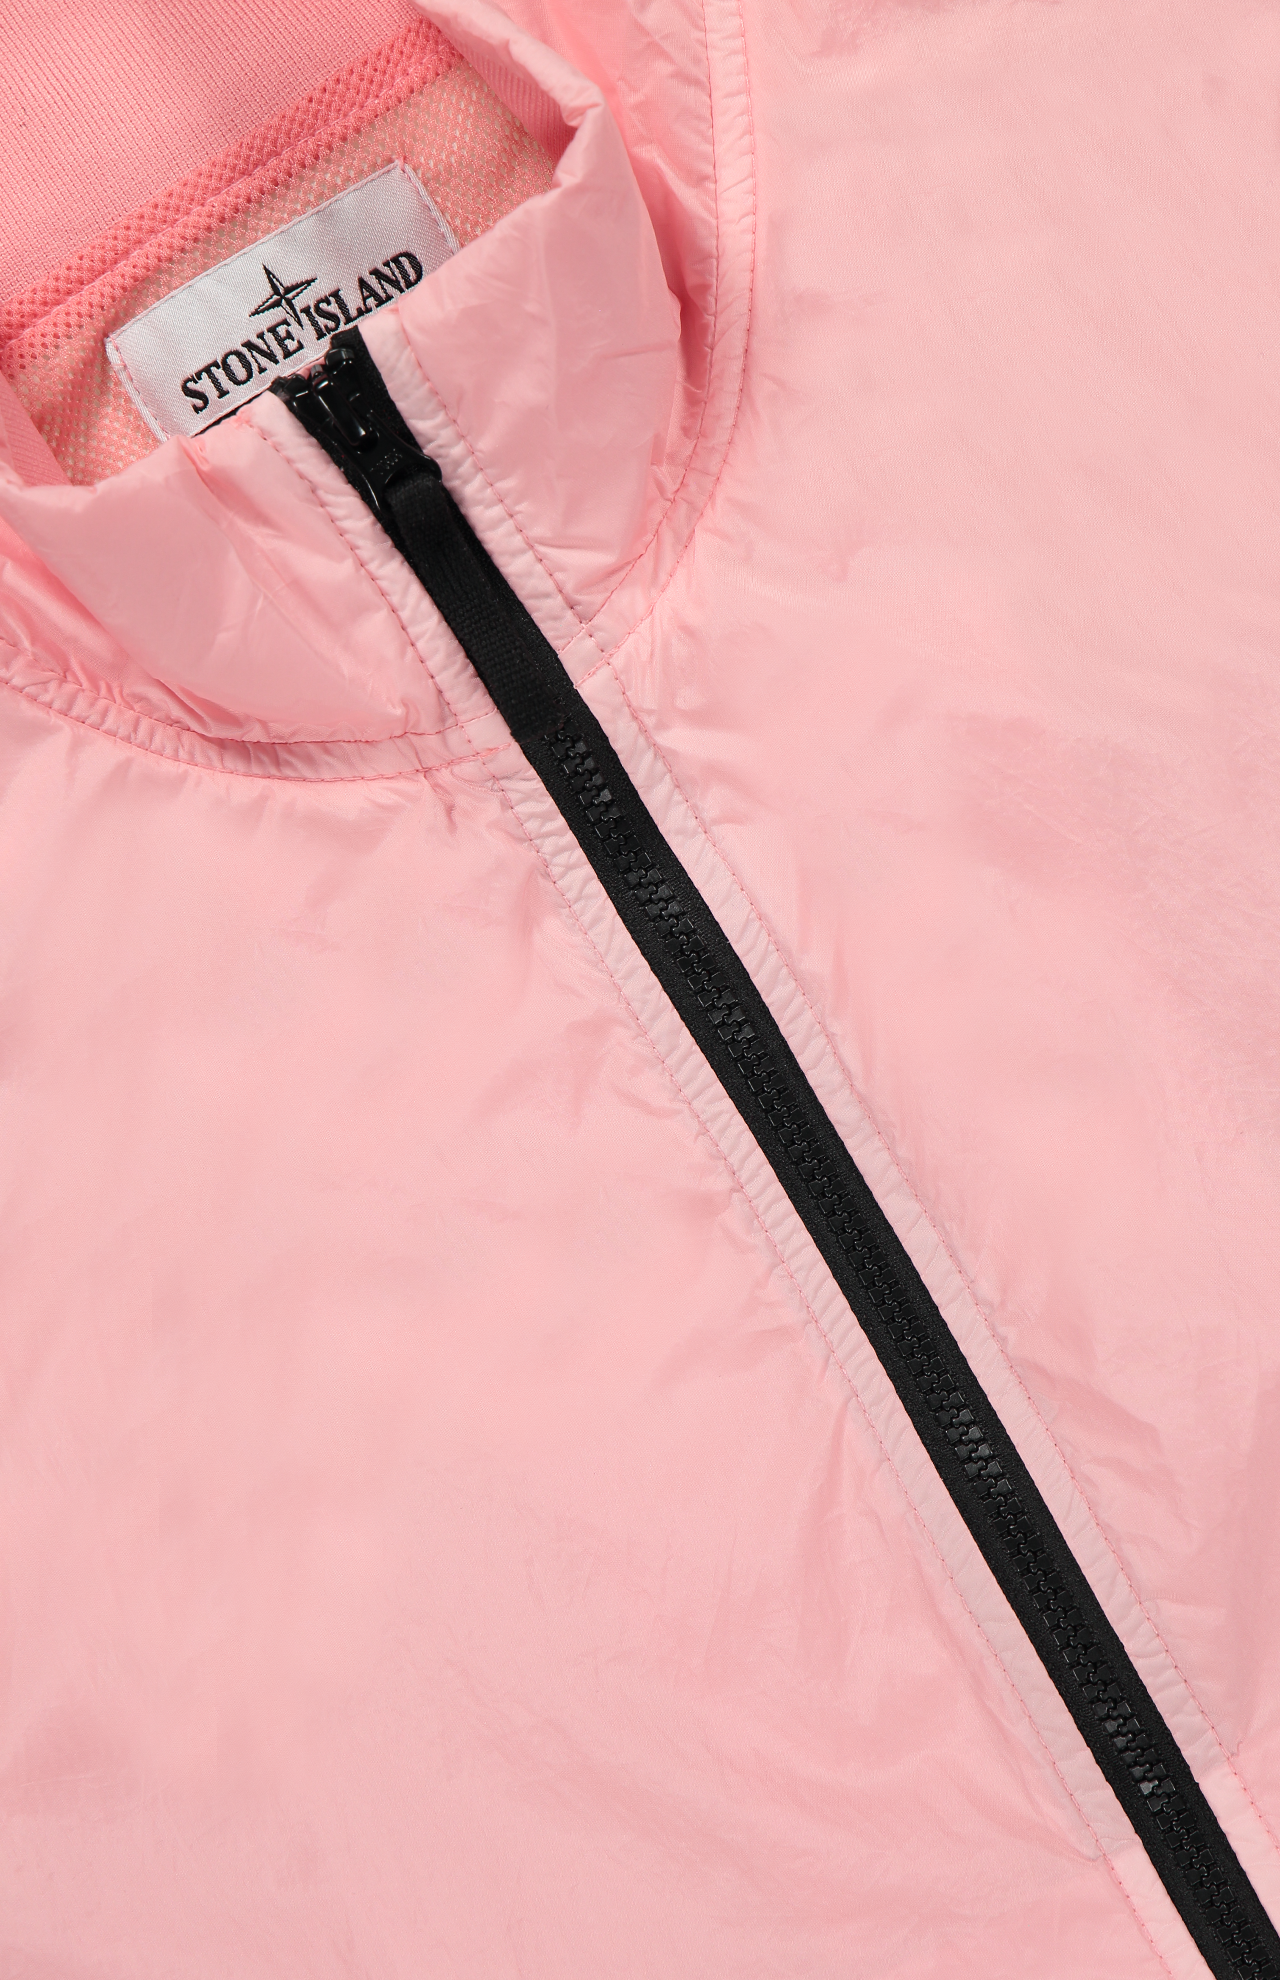 Stone Island Jacket with Black Hardware in Pink, Collar Detail Image  (7054254014579)